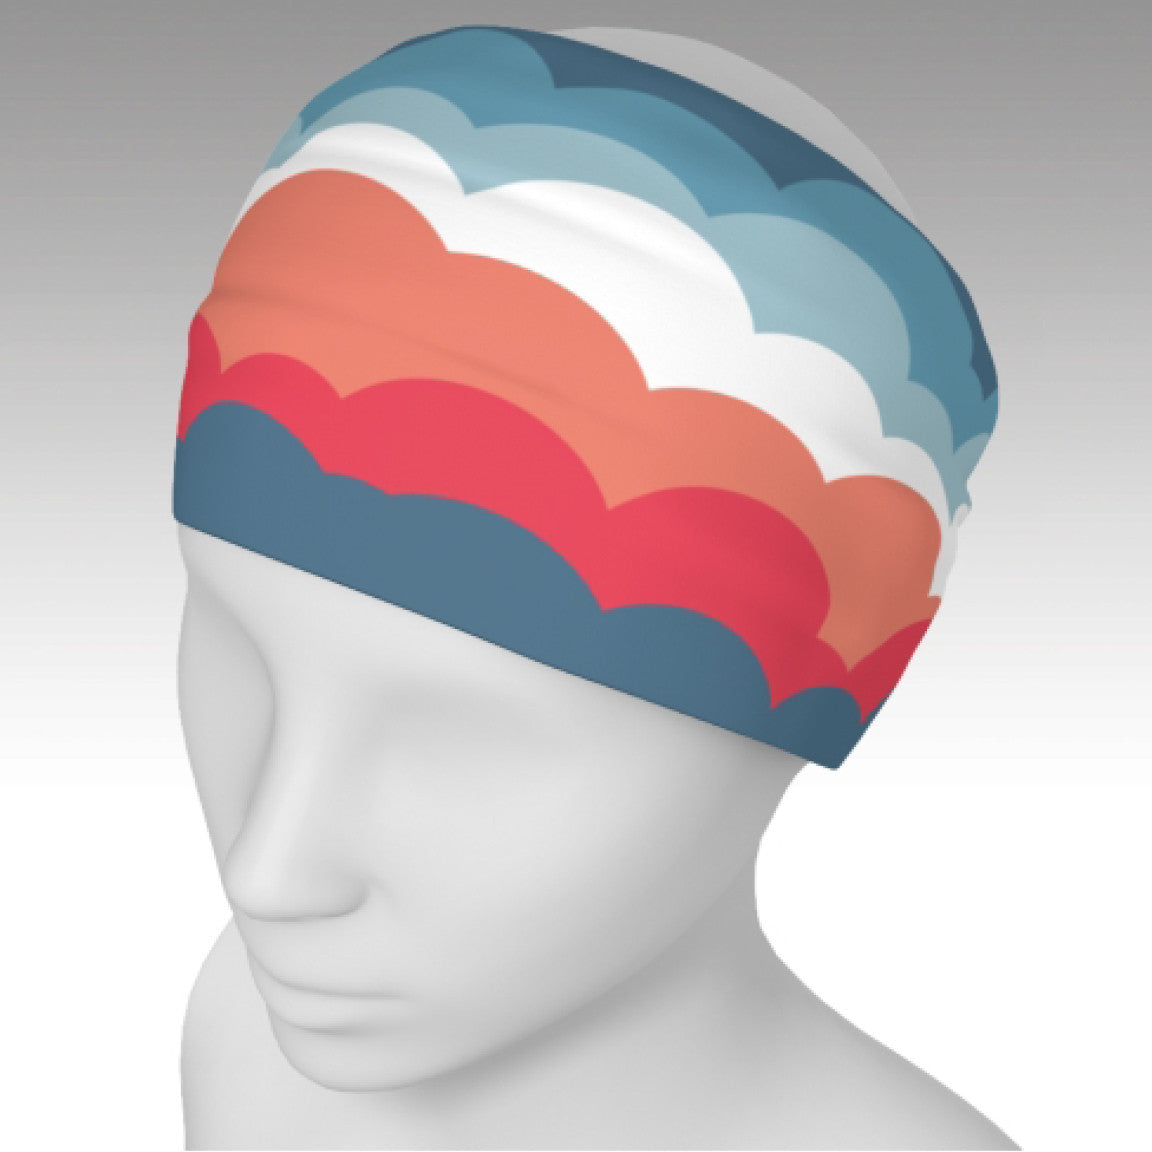 Headband with fun One Plane Jane cloud design. Coral, orange, blue, white. Full wrap around head and can be used as a scarf.  Perfect for travel, flying, pre-flight or dress up a t-shirt